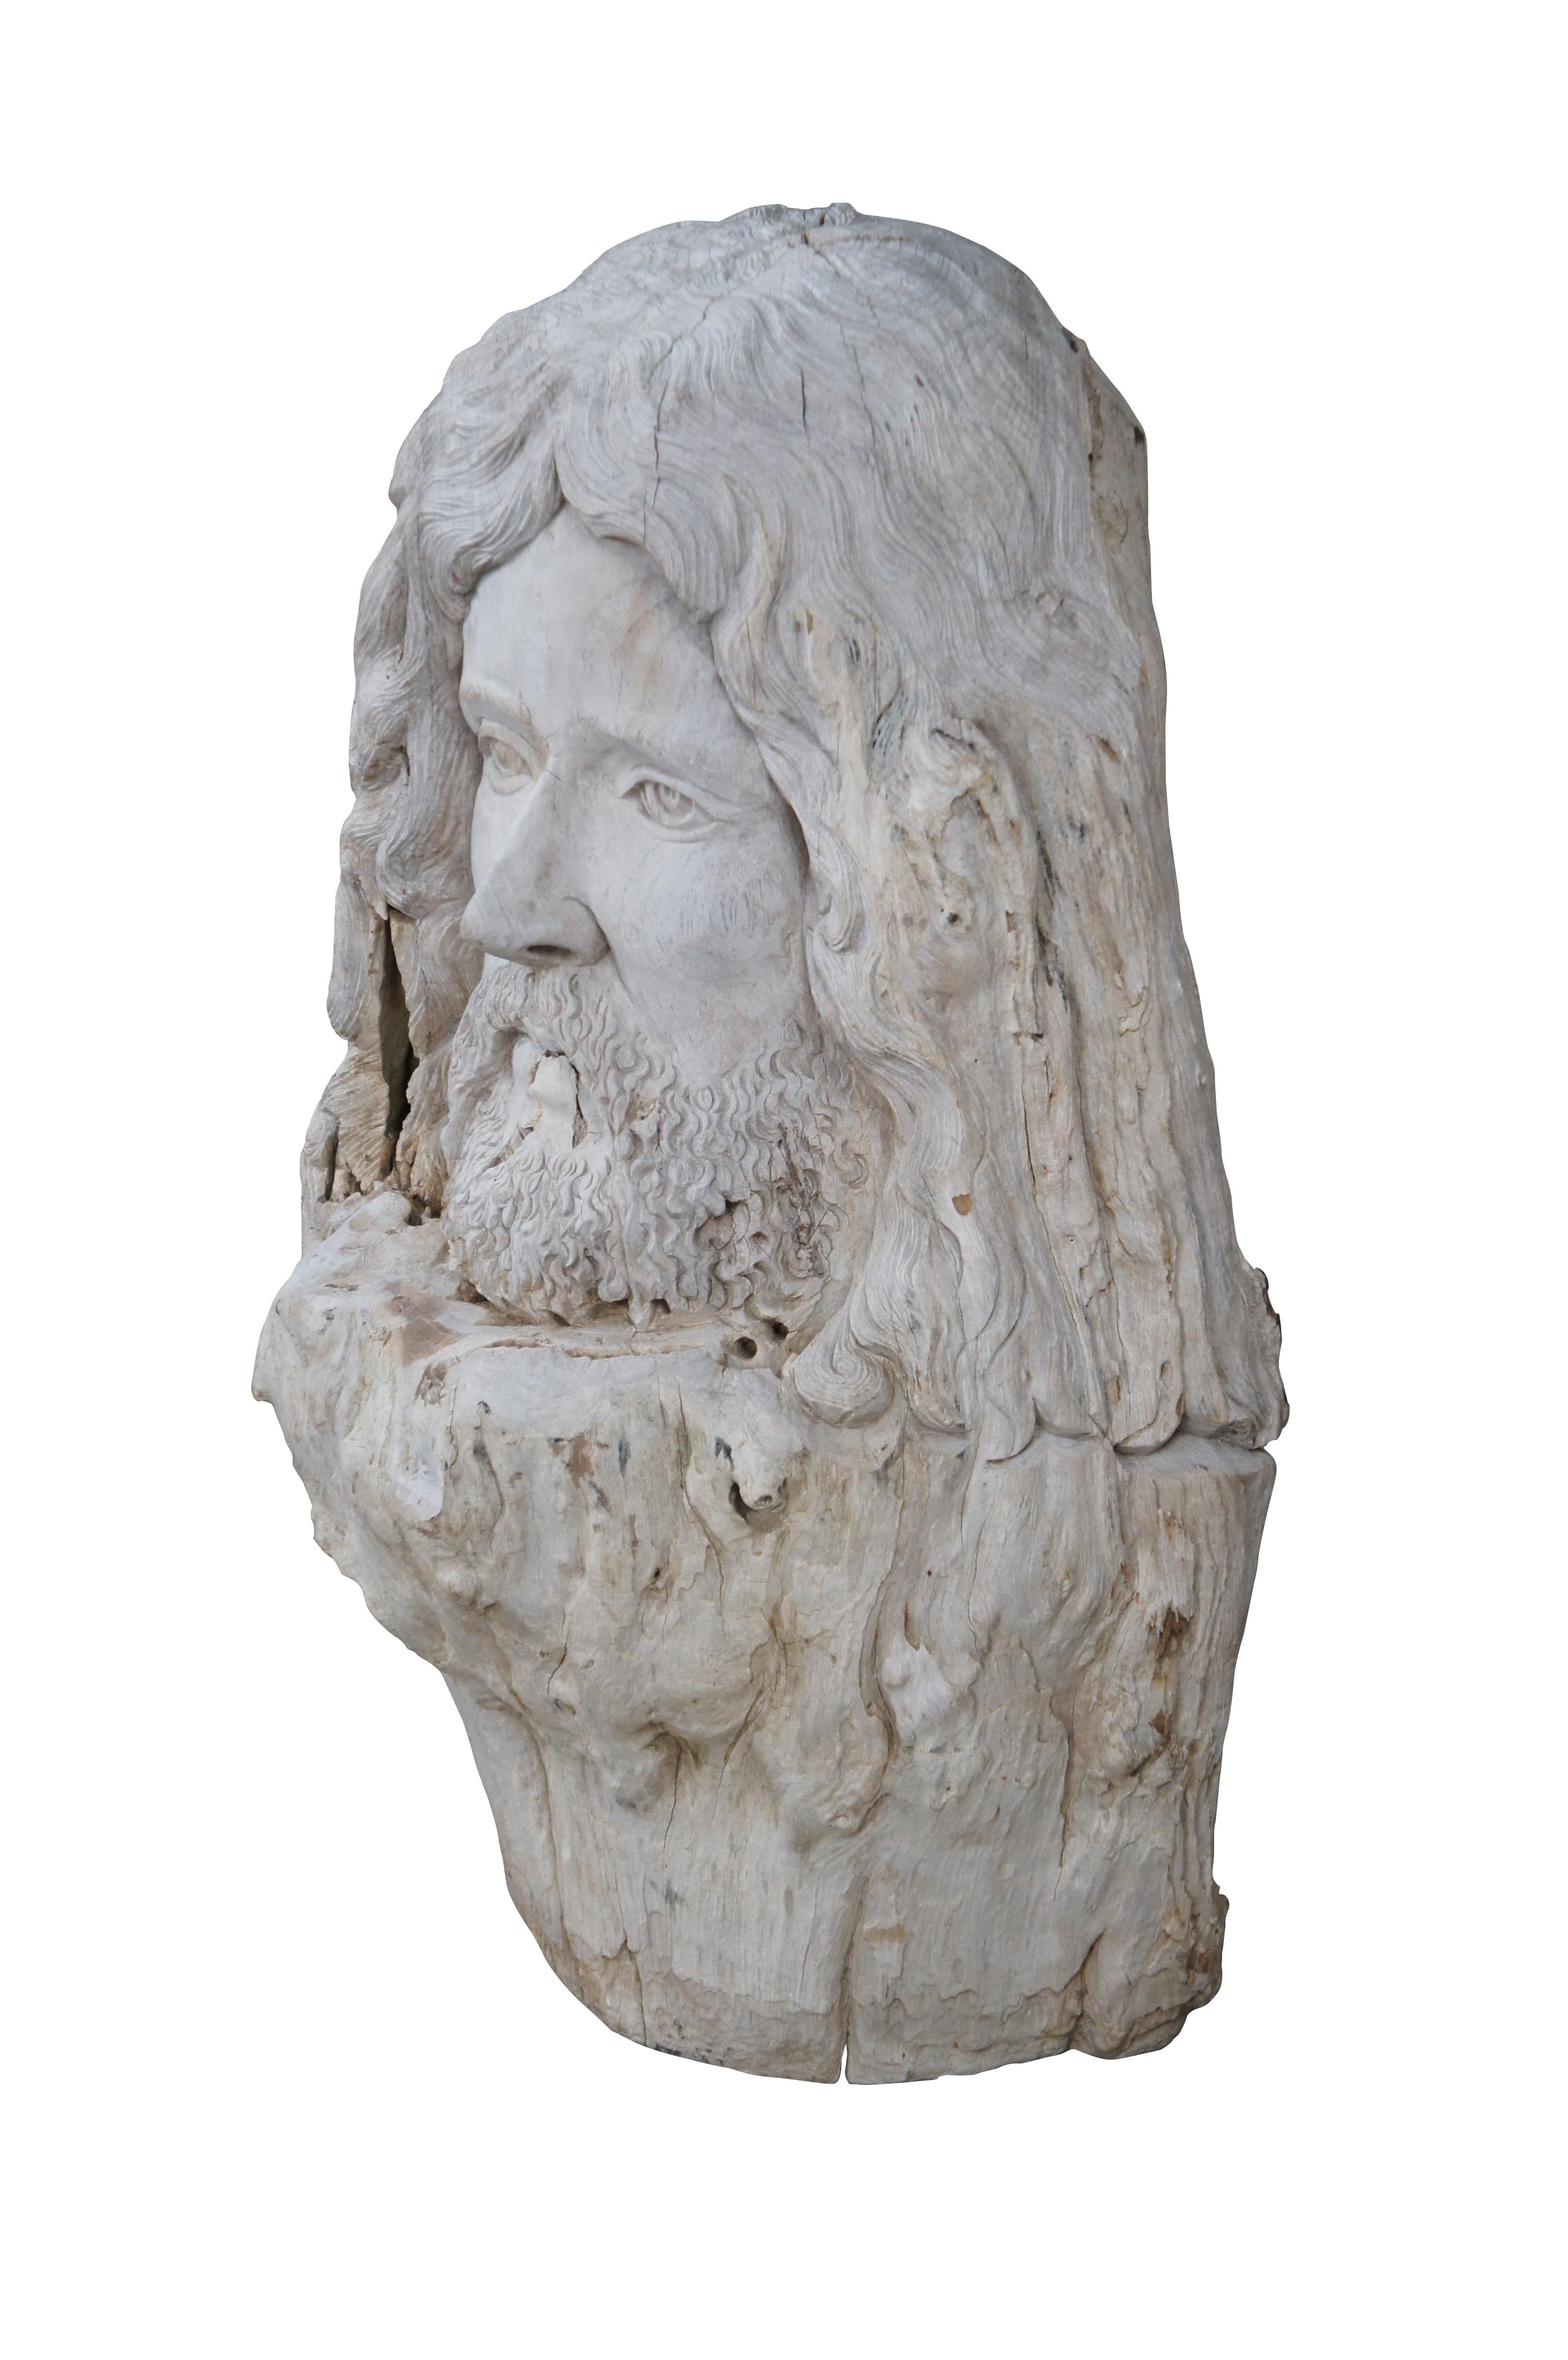 Rustic Large Hand Carved Driftwood Sculpture Zues Bust Statue Greek Roman Mythology 29